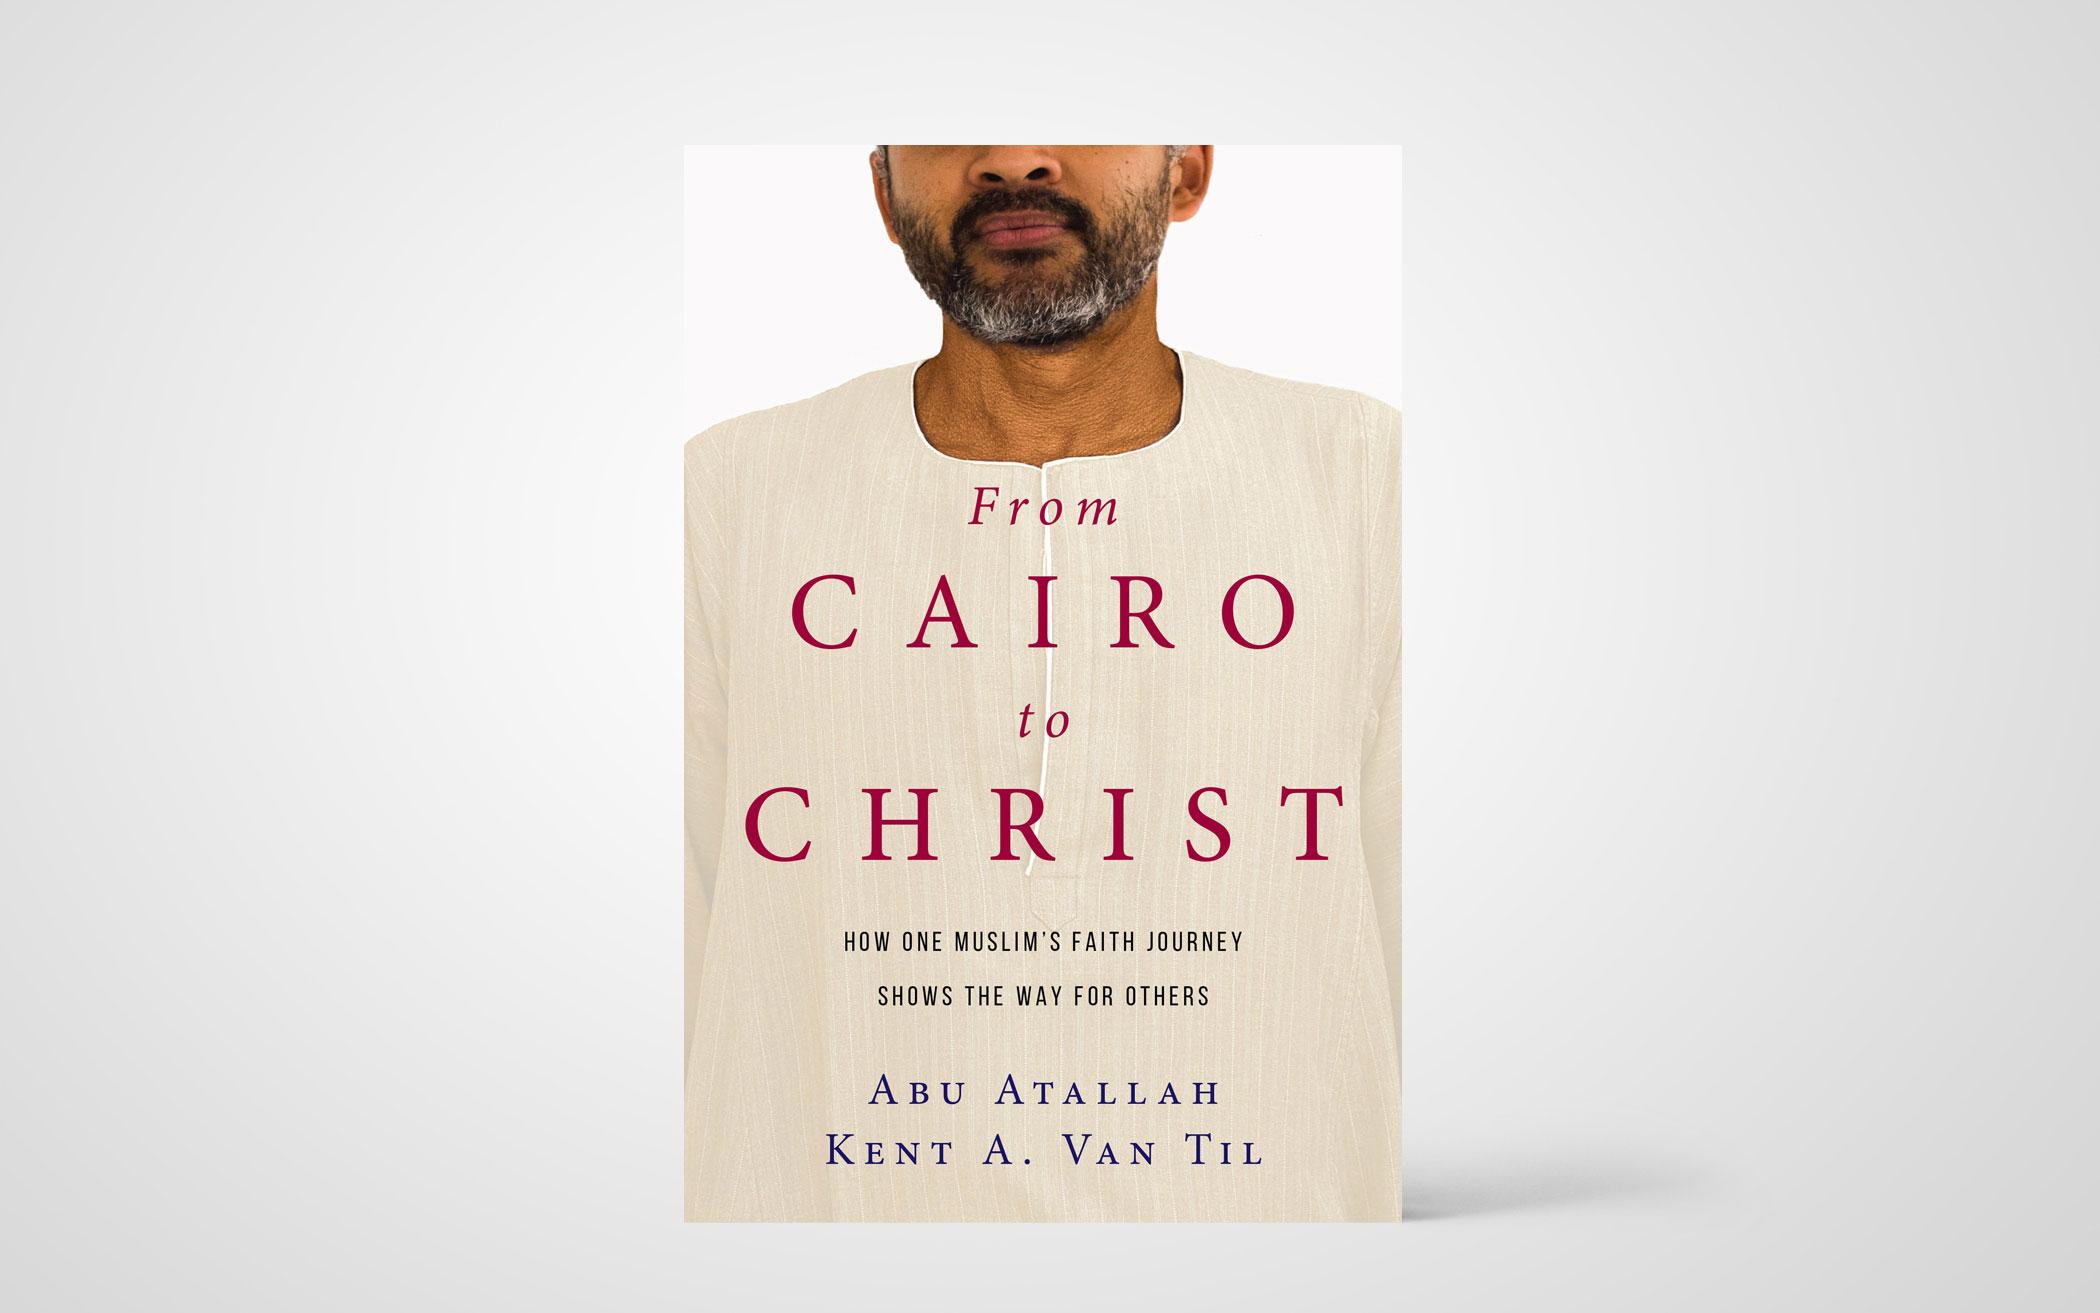 From Cairo to Christ: How One Muslim’s Faith Journey Shows the Way for Others